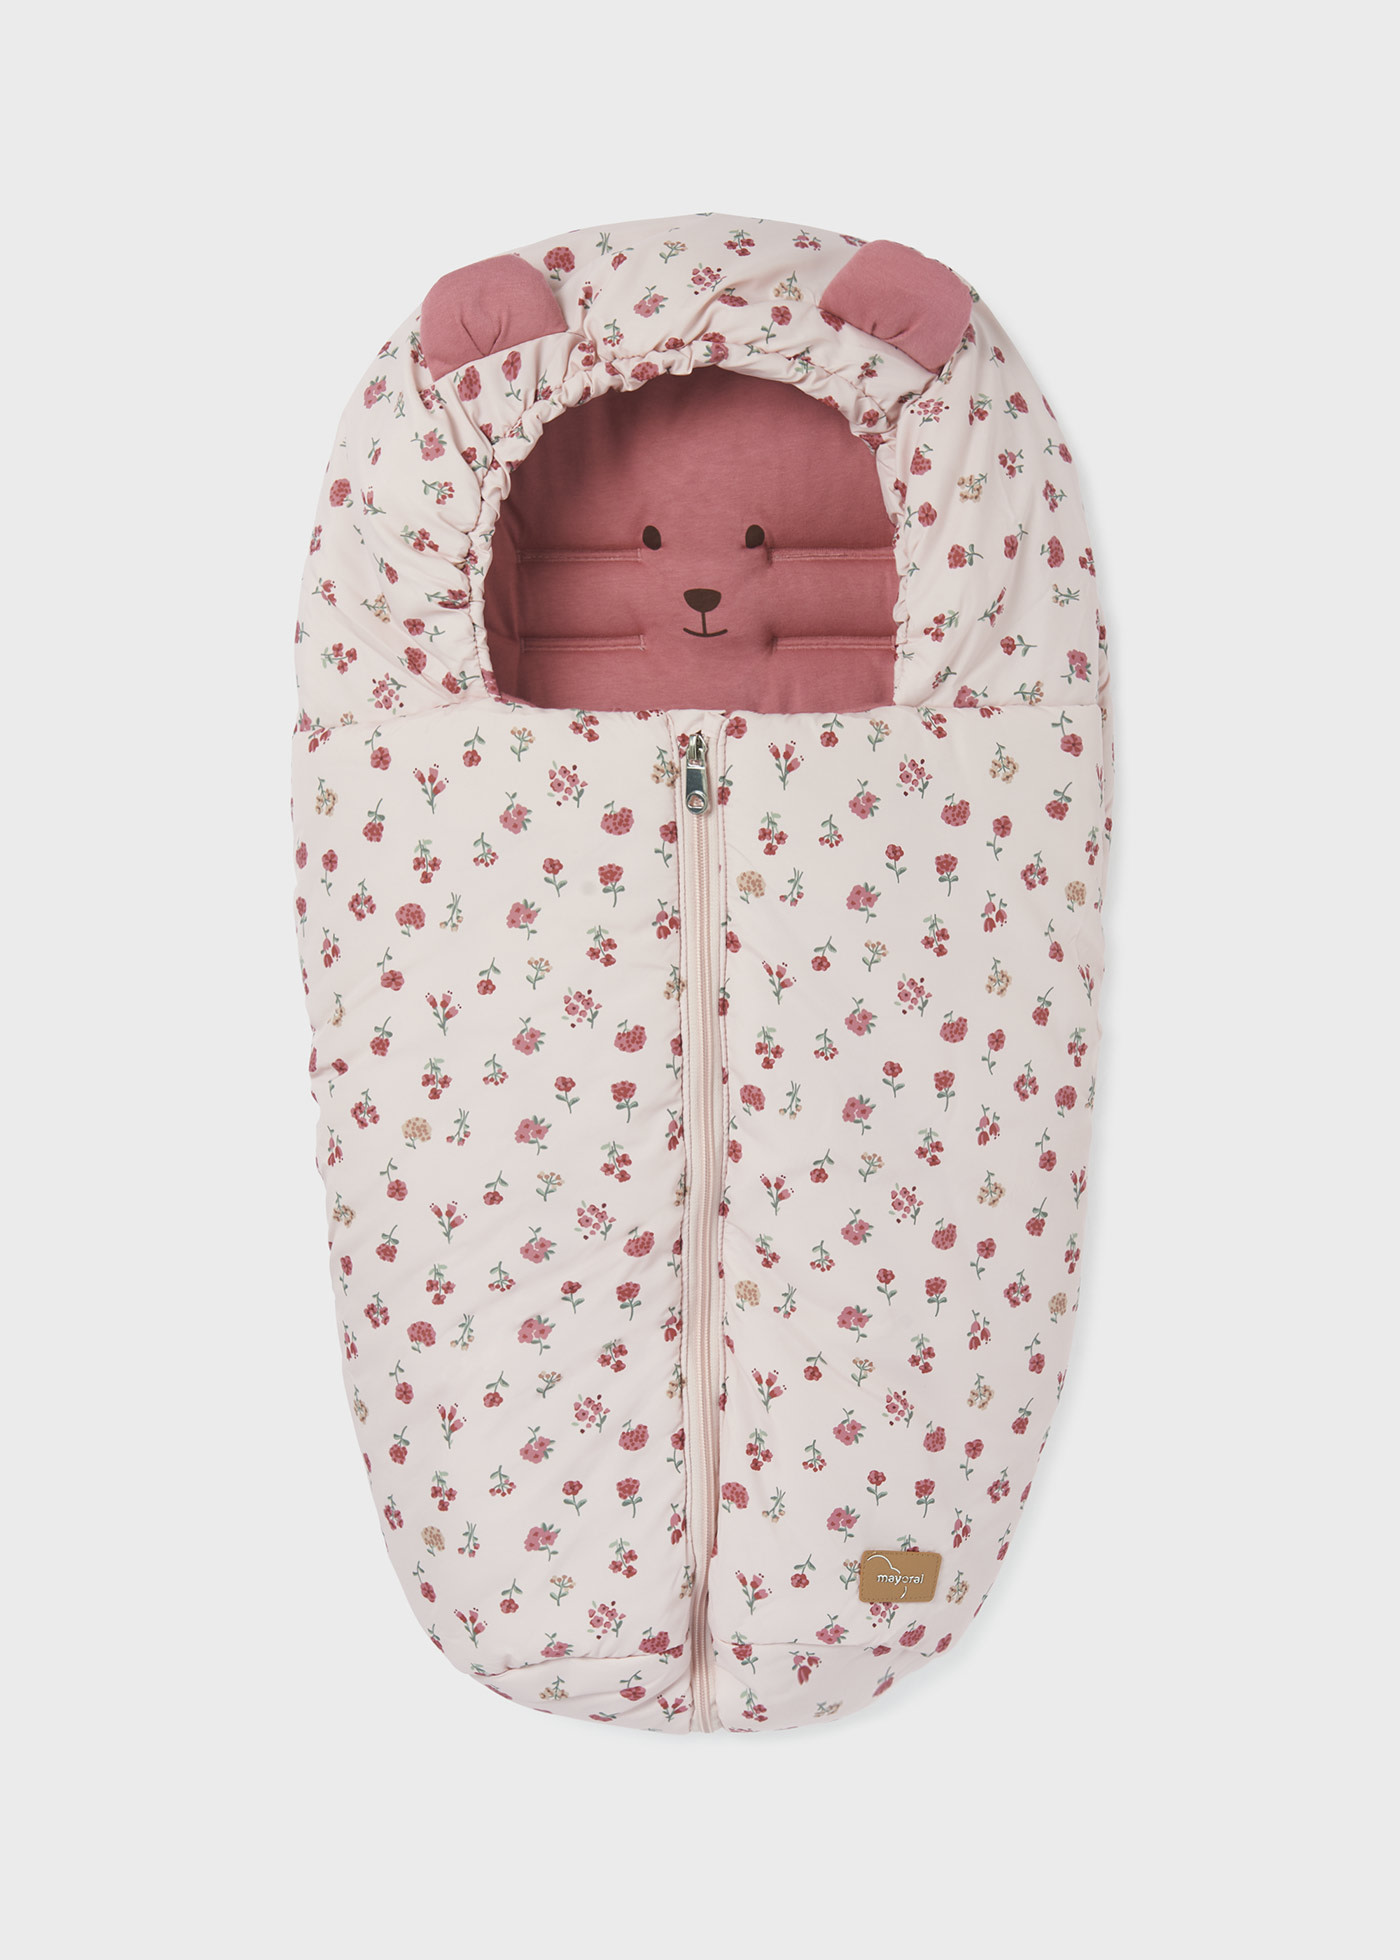 Patterned footmuff baby